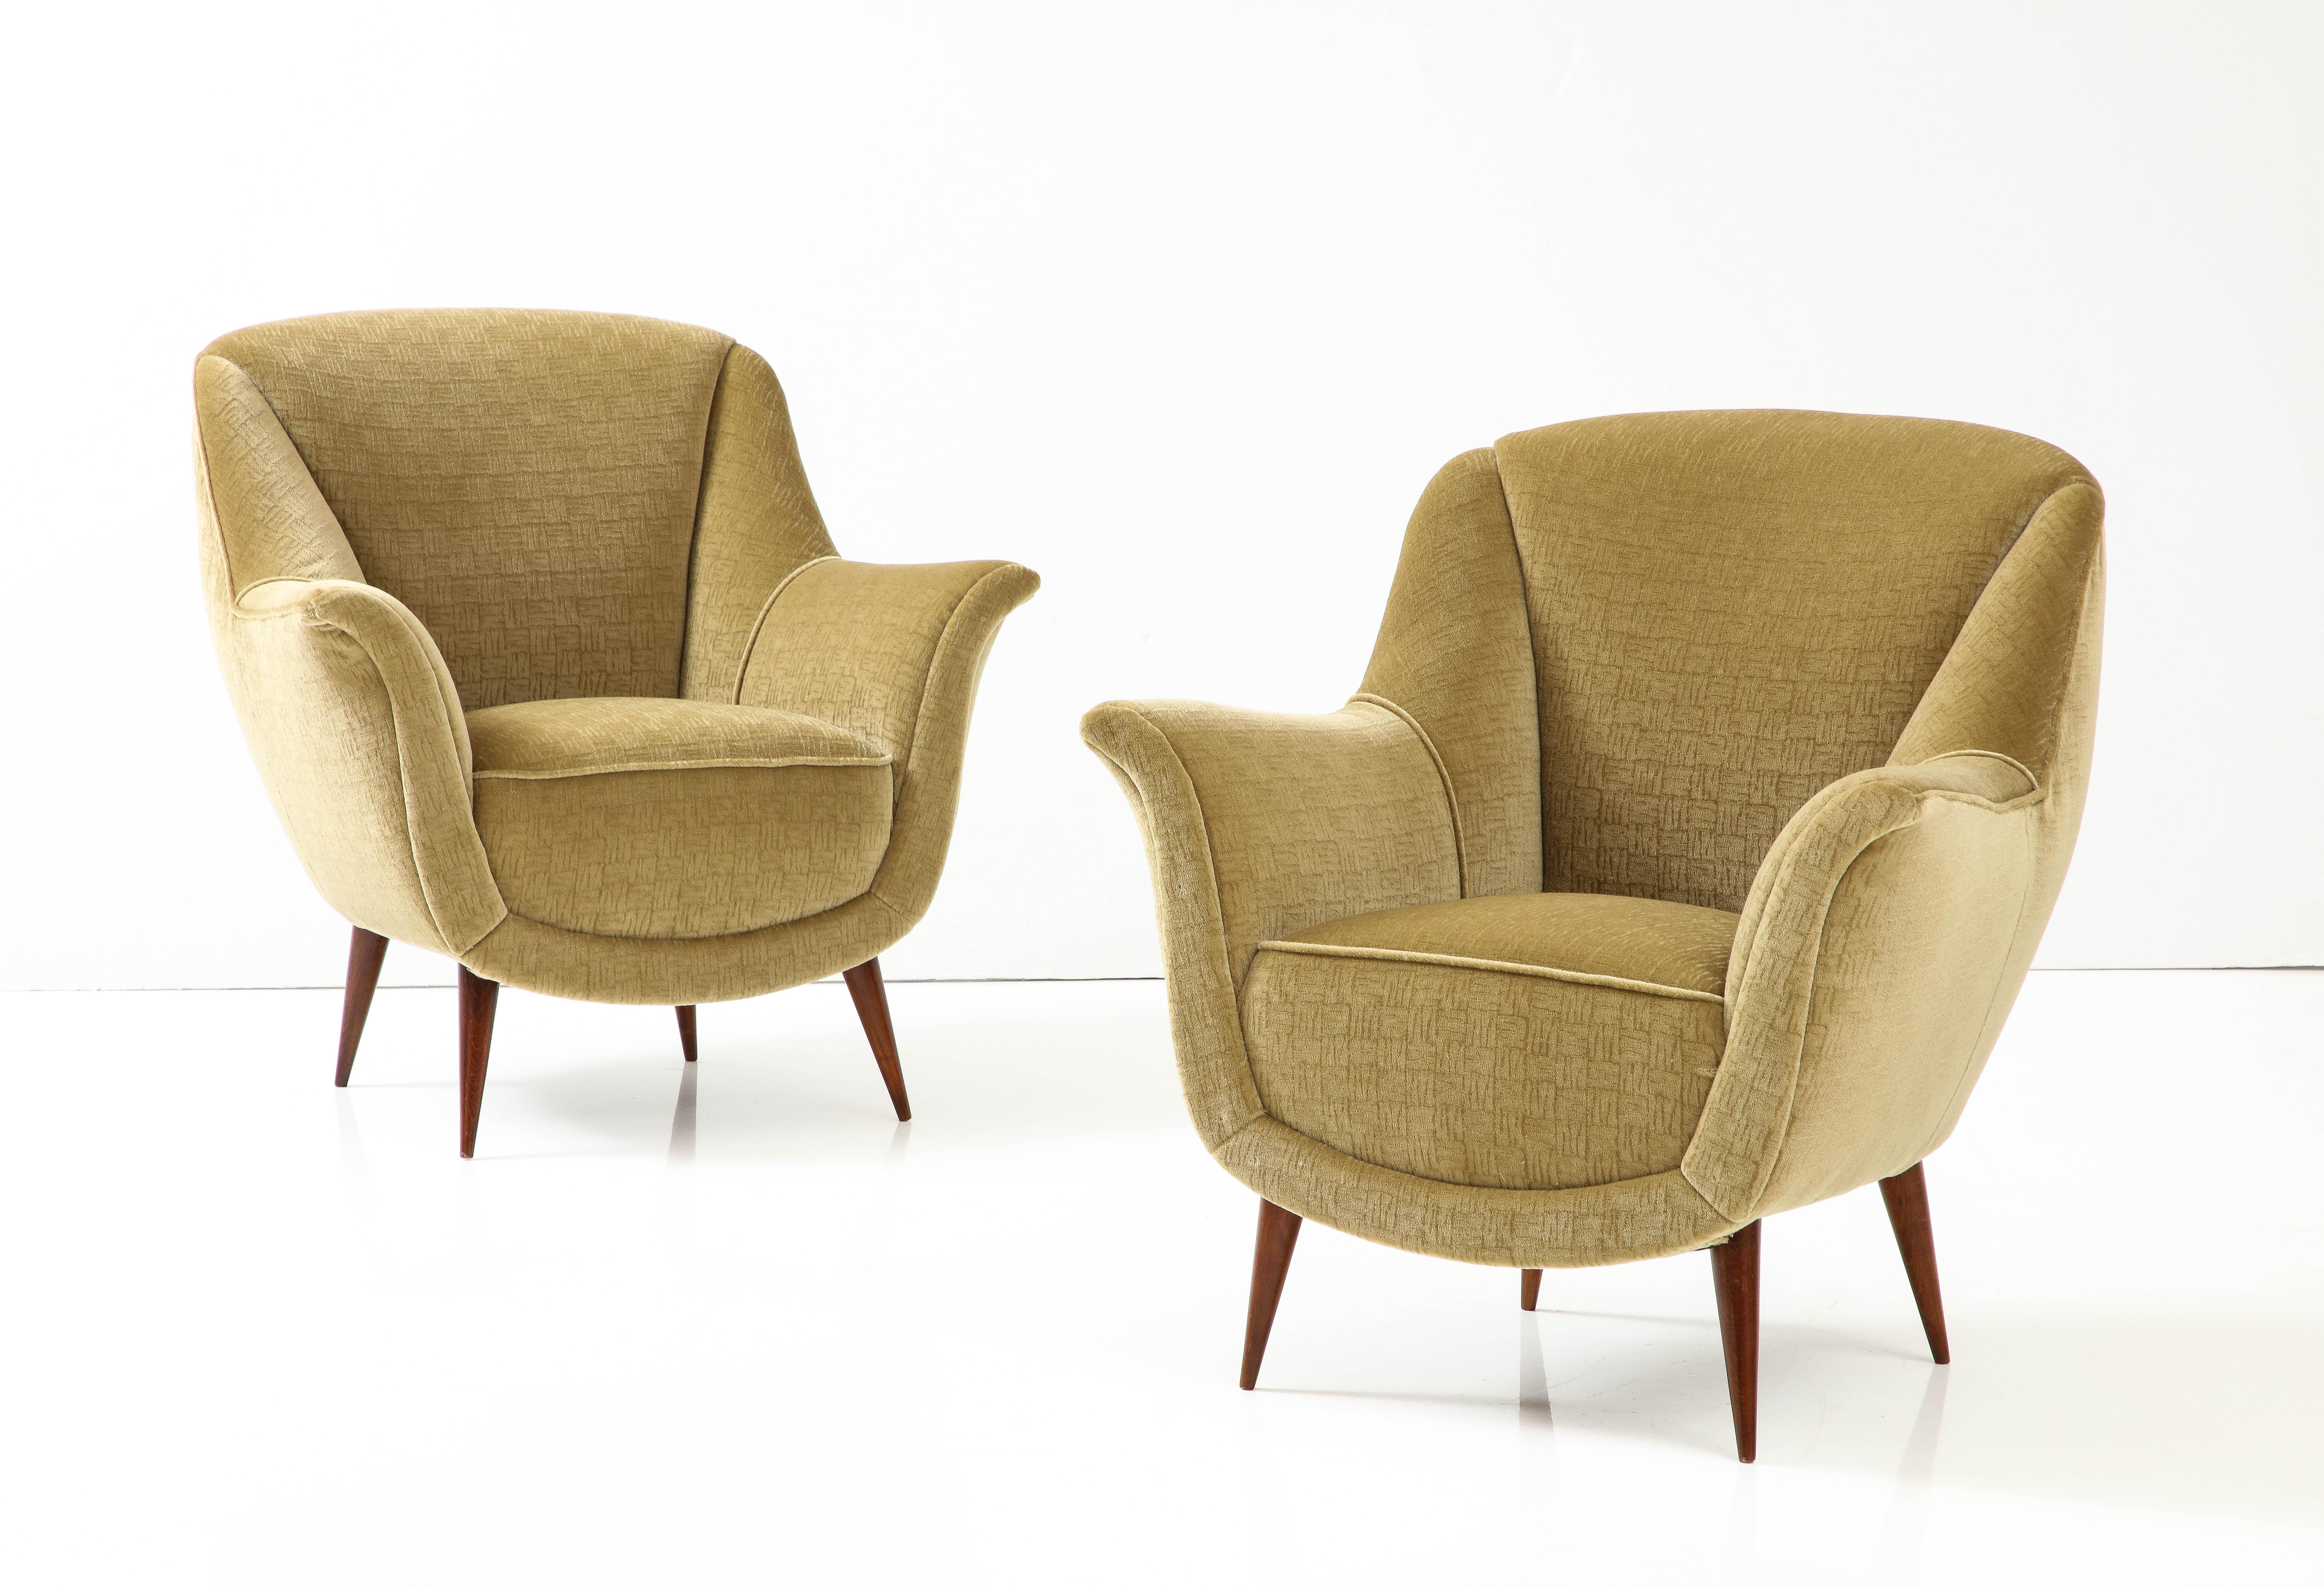 1950's Modernist Gio Ponti Style Italian Lounge Chairs In Mohair Polsterung im Angebot 1